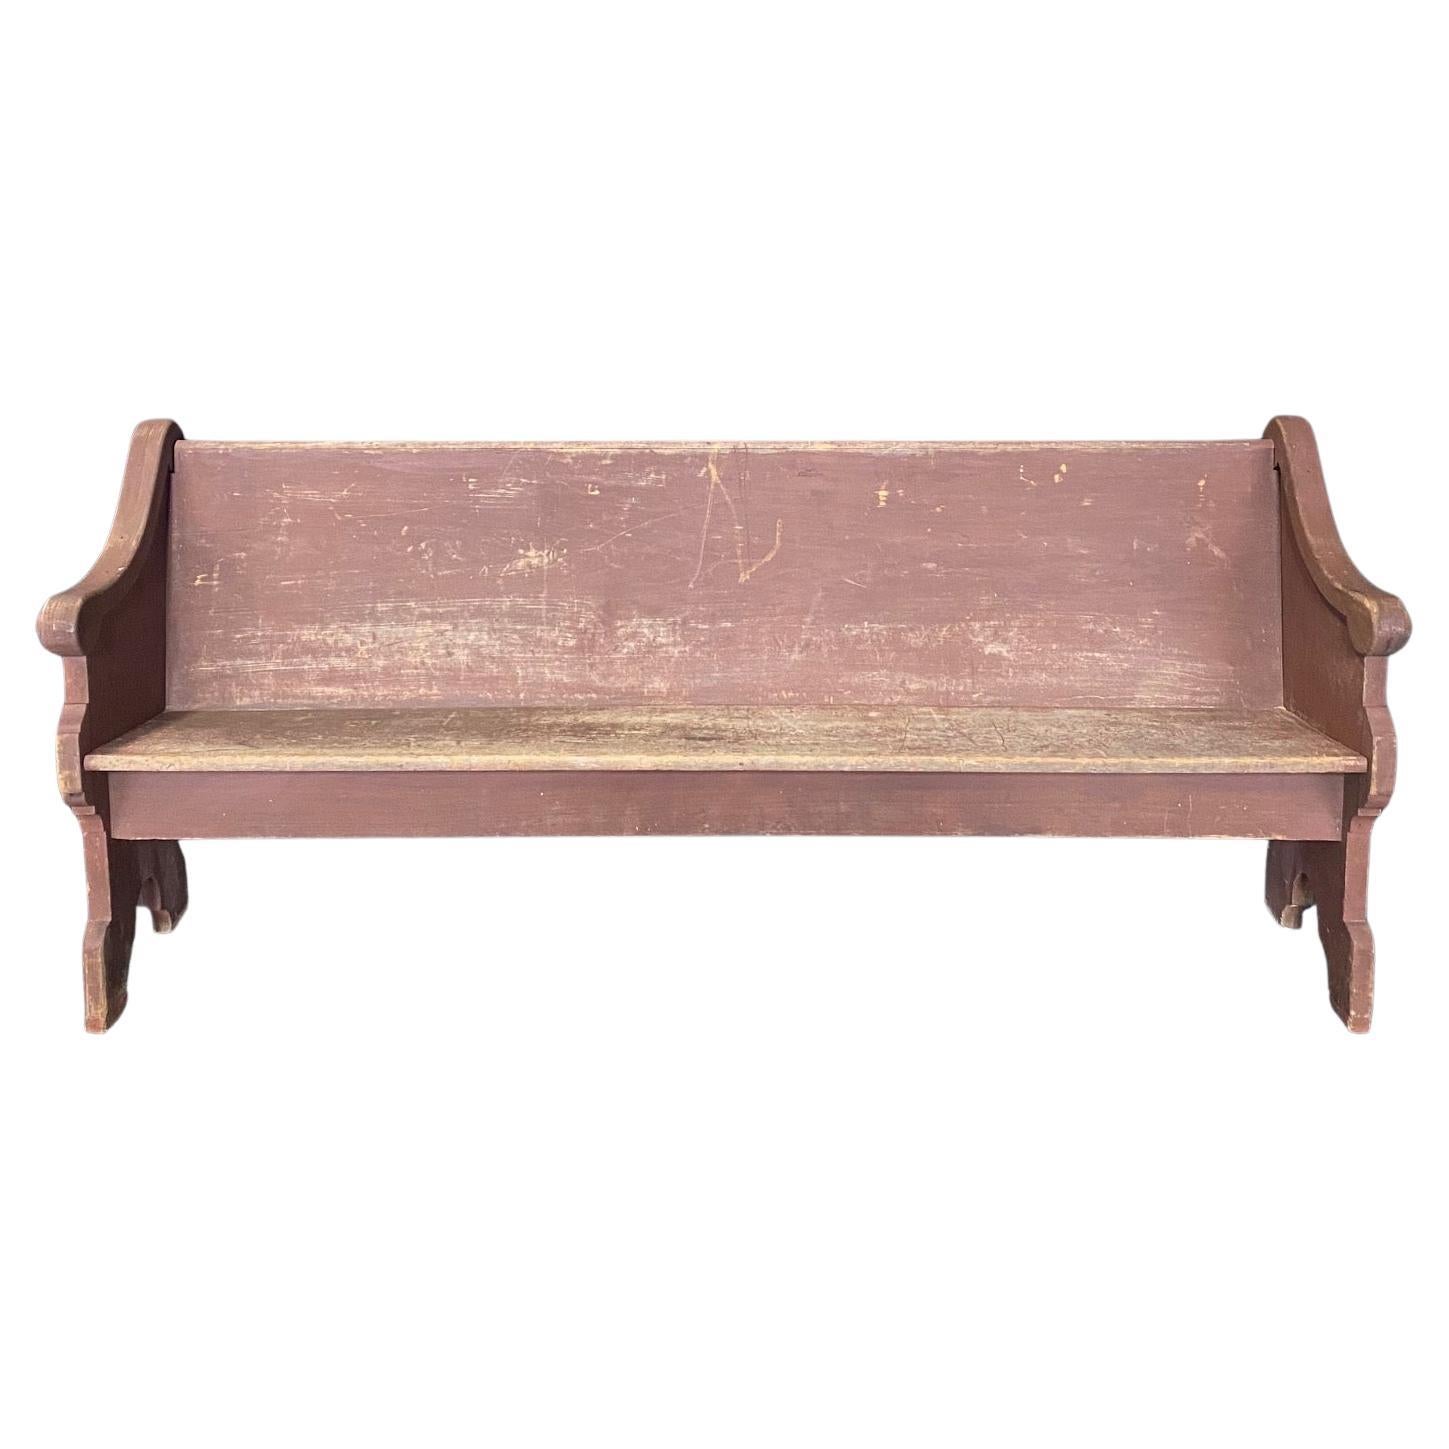 Rustic 19th Century Americana Church Pew Bench with Original Paint